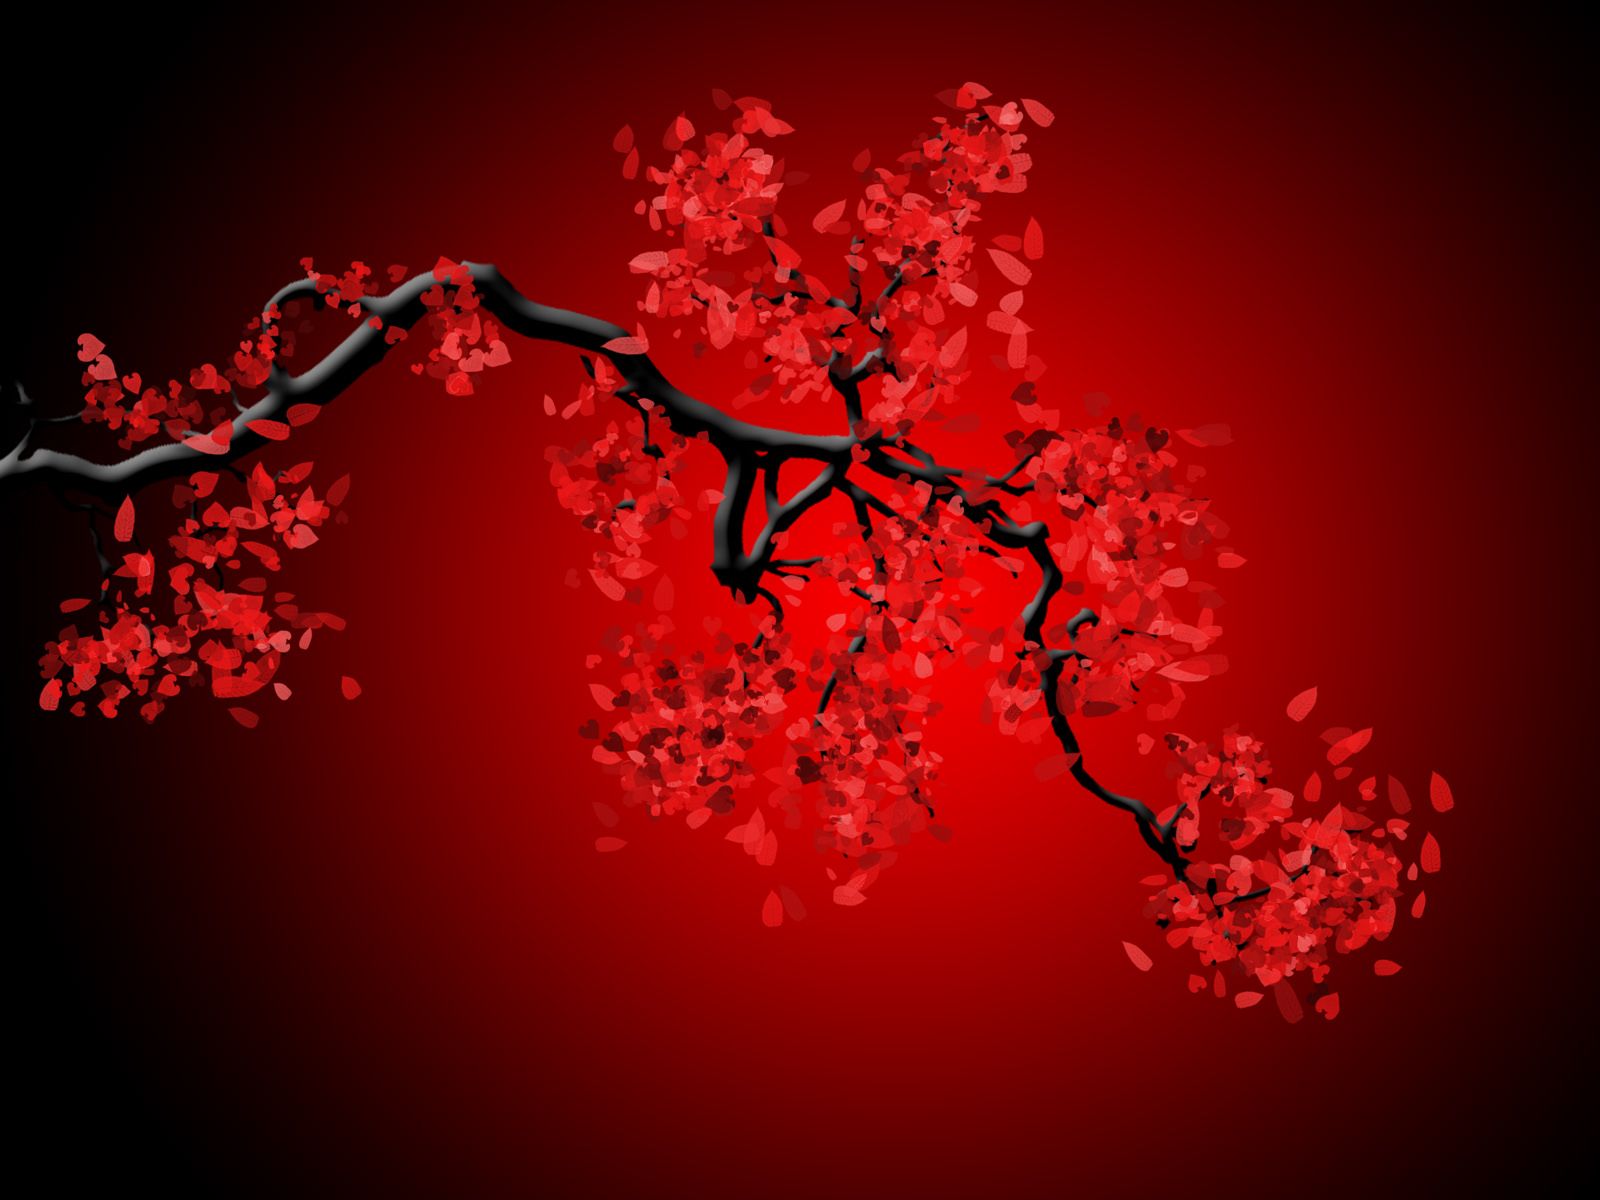 Red Japanese Wallpaper Free Red Japanese Background